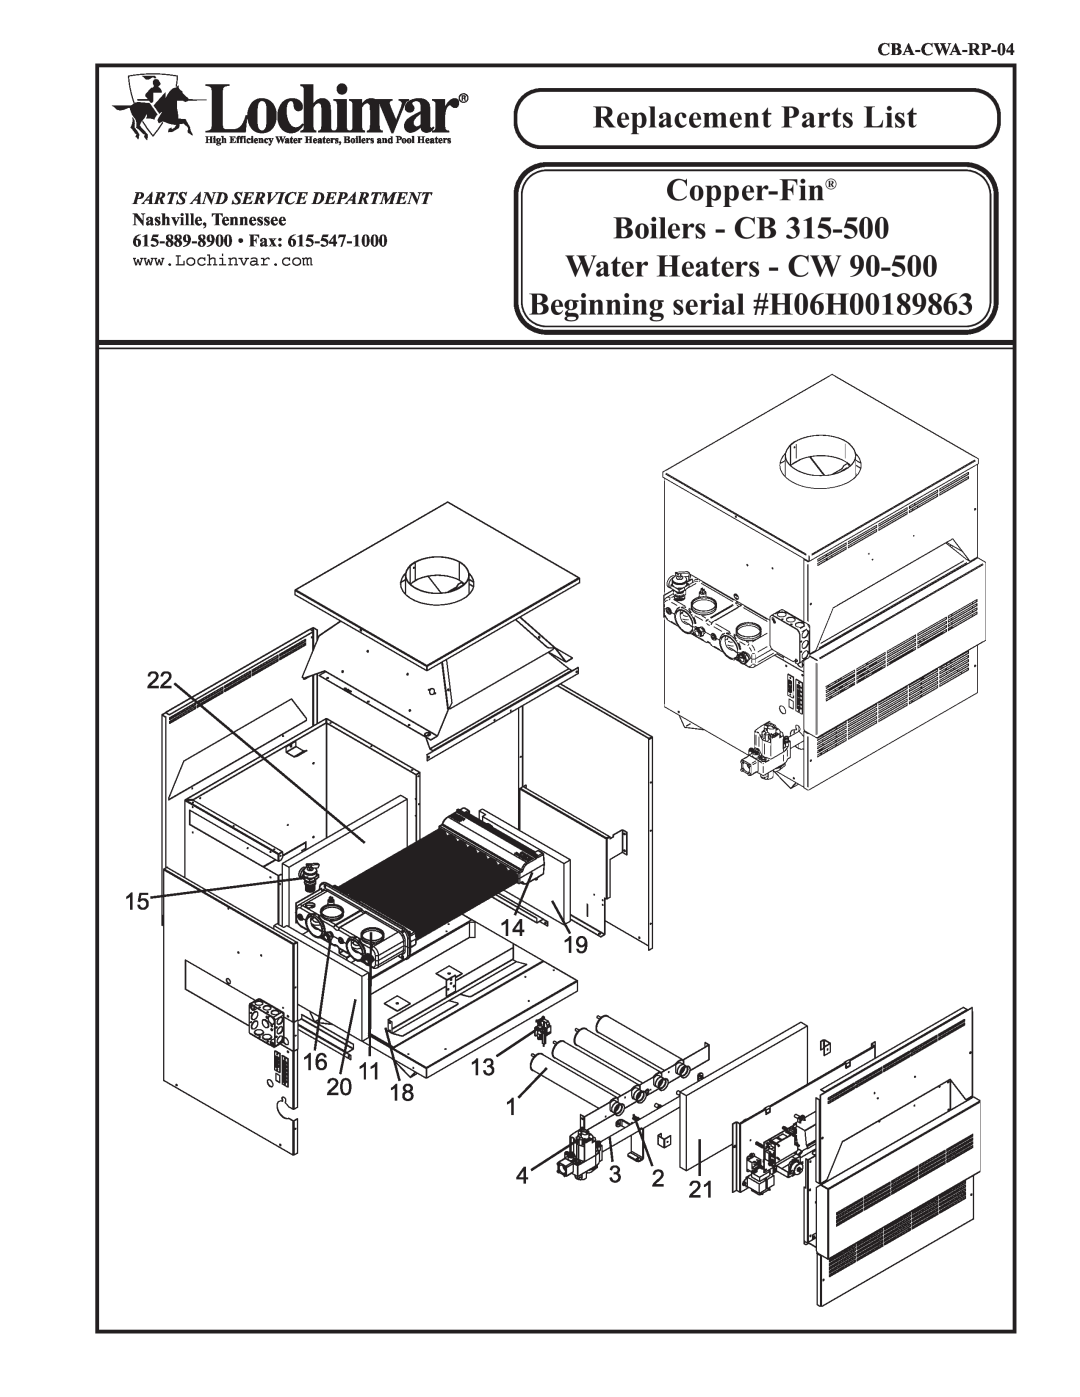 Lochinvar CB 315-500, CW 90-500 manual Replacement Parts List, Copper-Fin, Boilers - CB, Water Heaters - CW, CBA-CWA-RP-04 